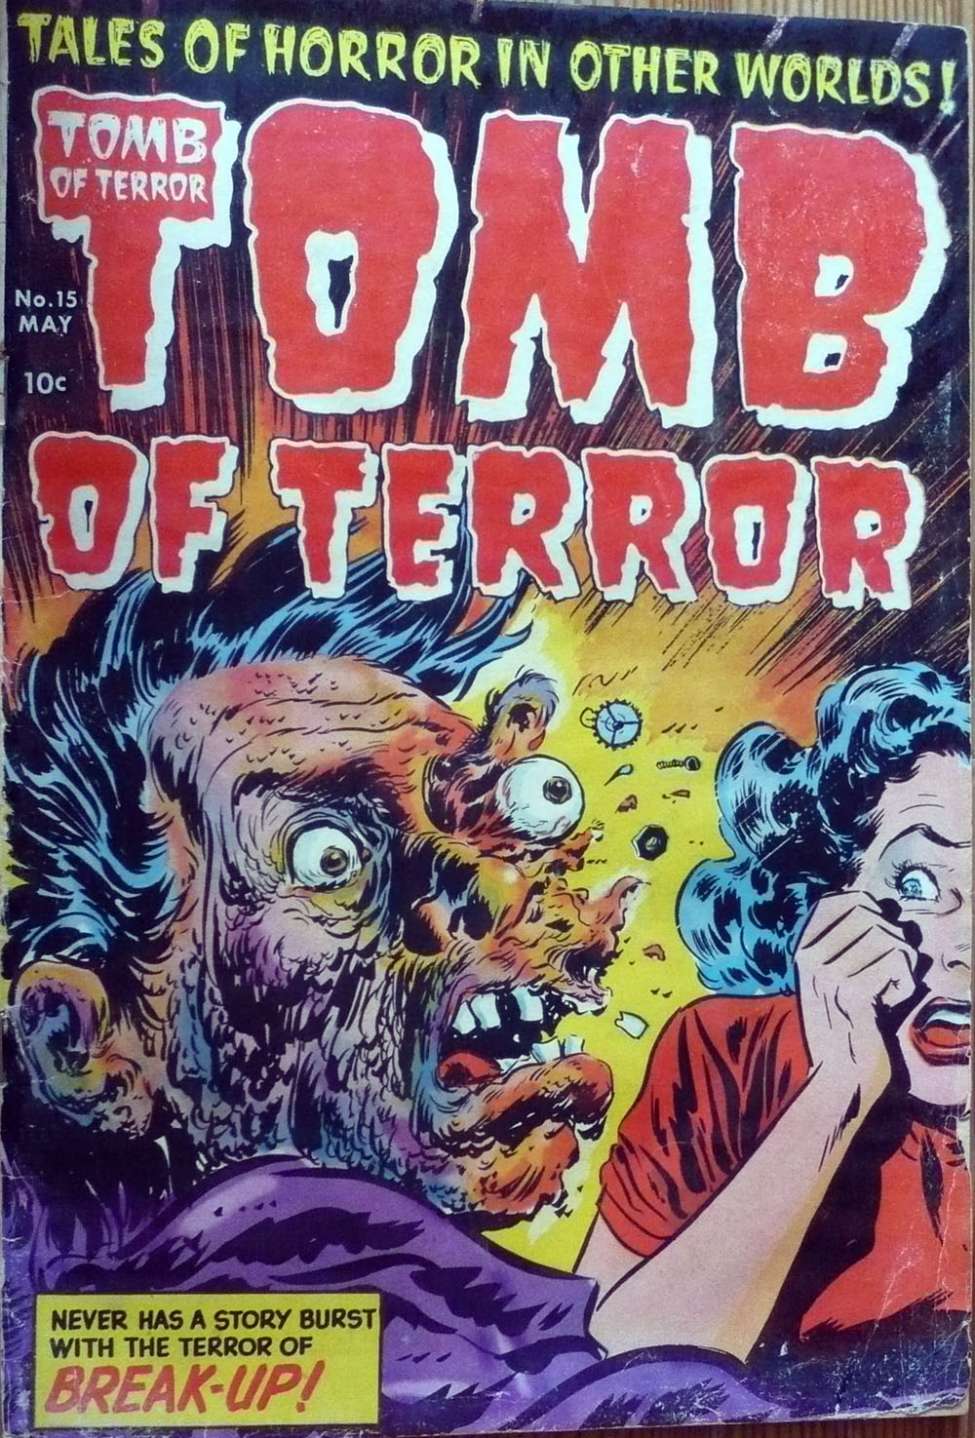 Book Cover For Tomb of Terror 15